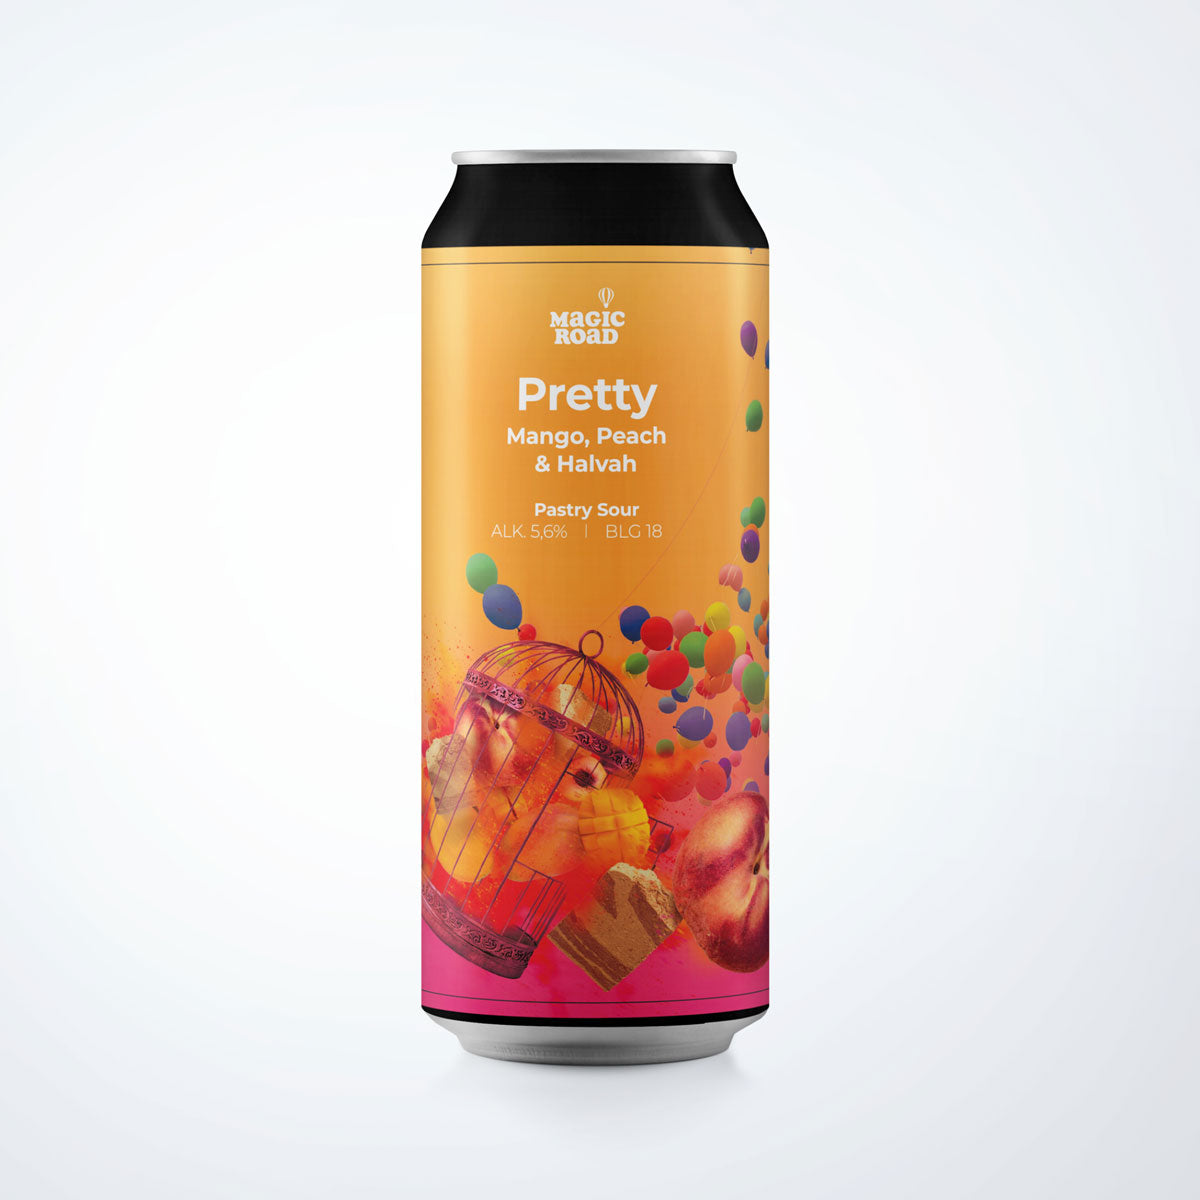 Magic Road Brewery, Pretty, Mango, Pfirsich, Halvah, Pastry Sour 5.6%